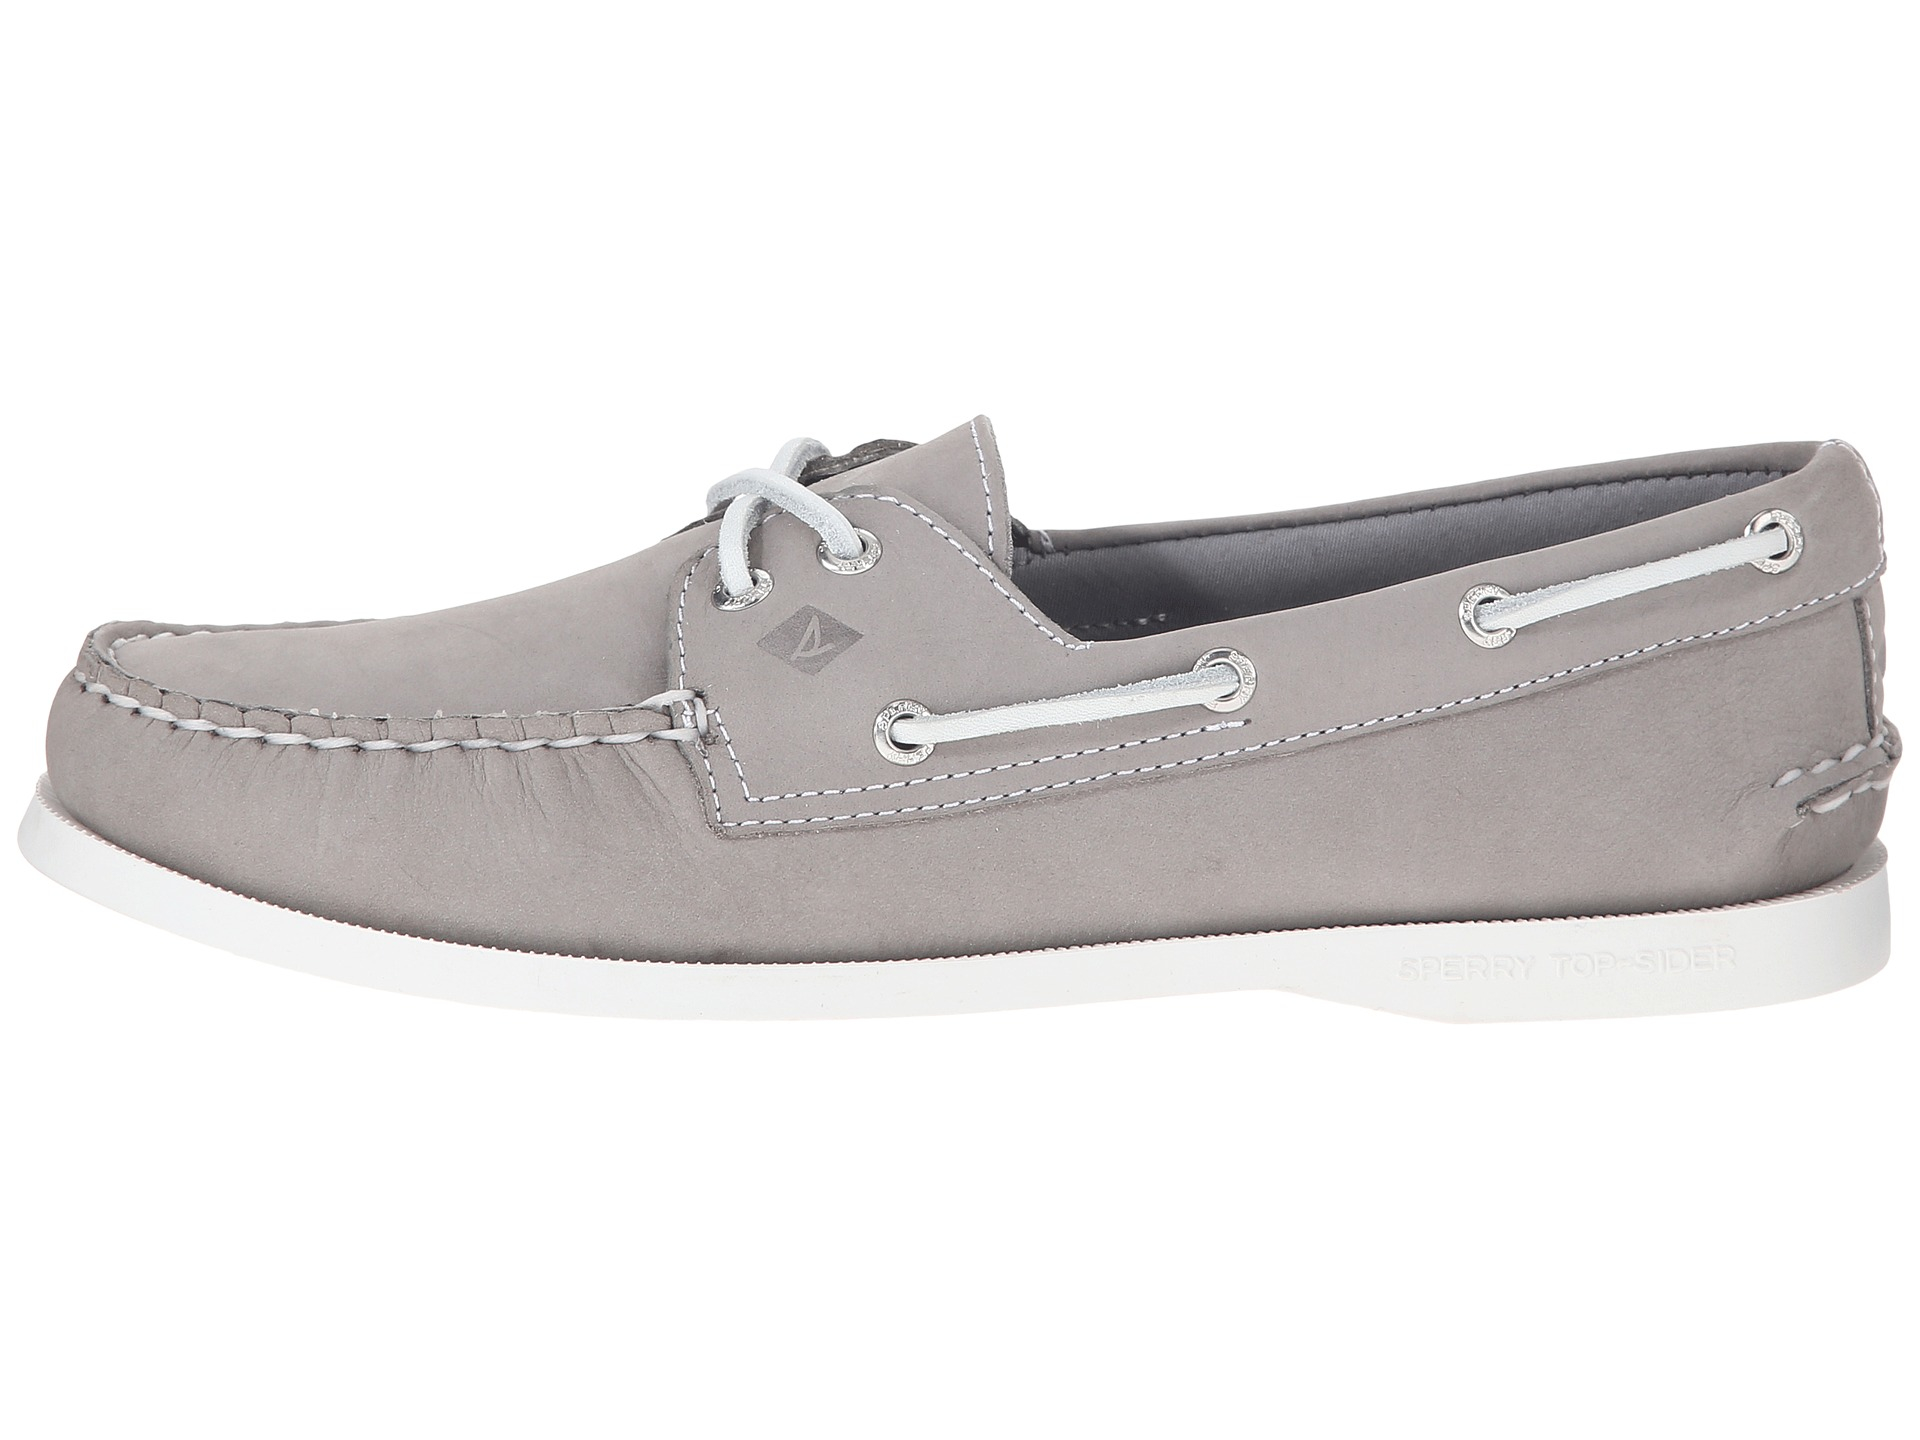 Lyst - Sperry Top-Sider A/o 2-eye Leather in Gray